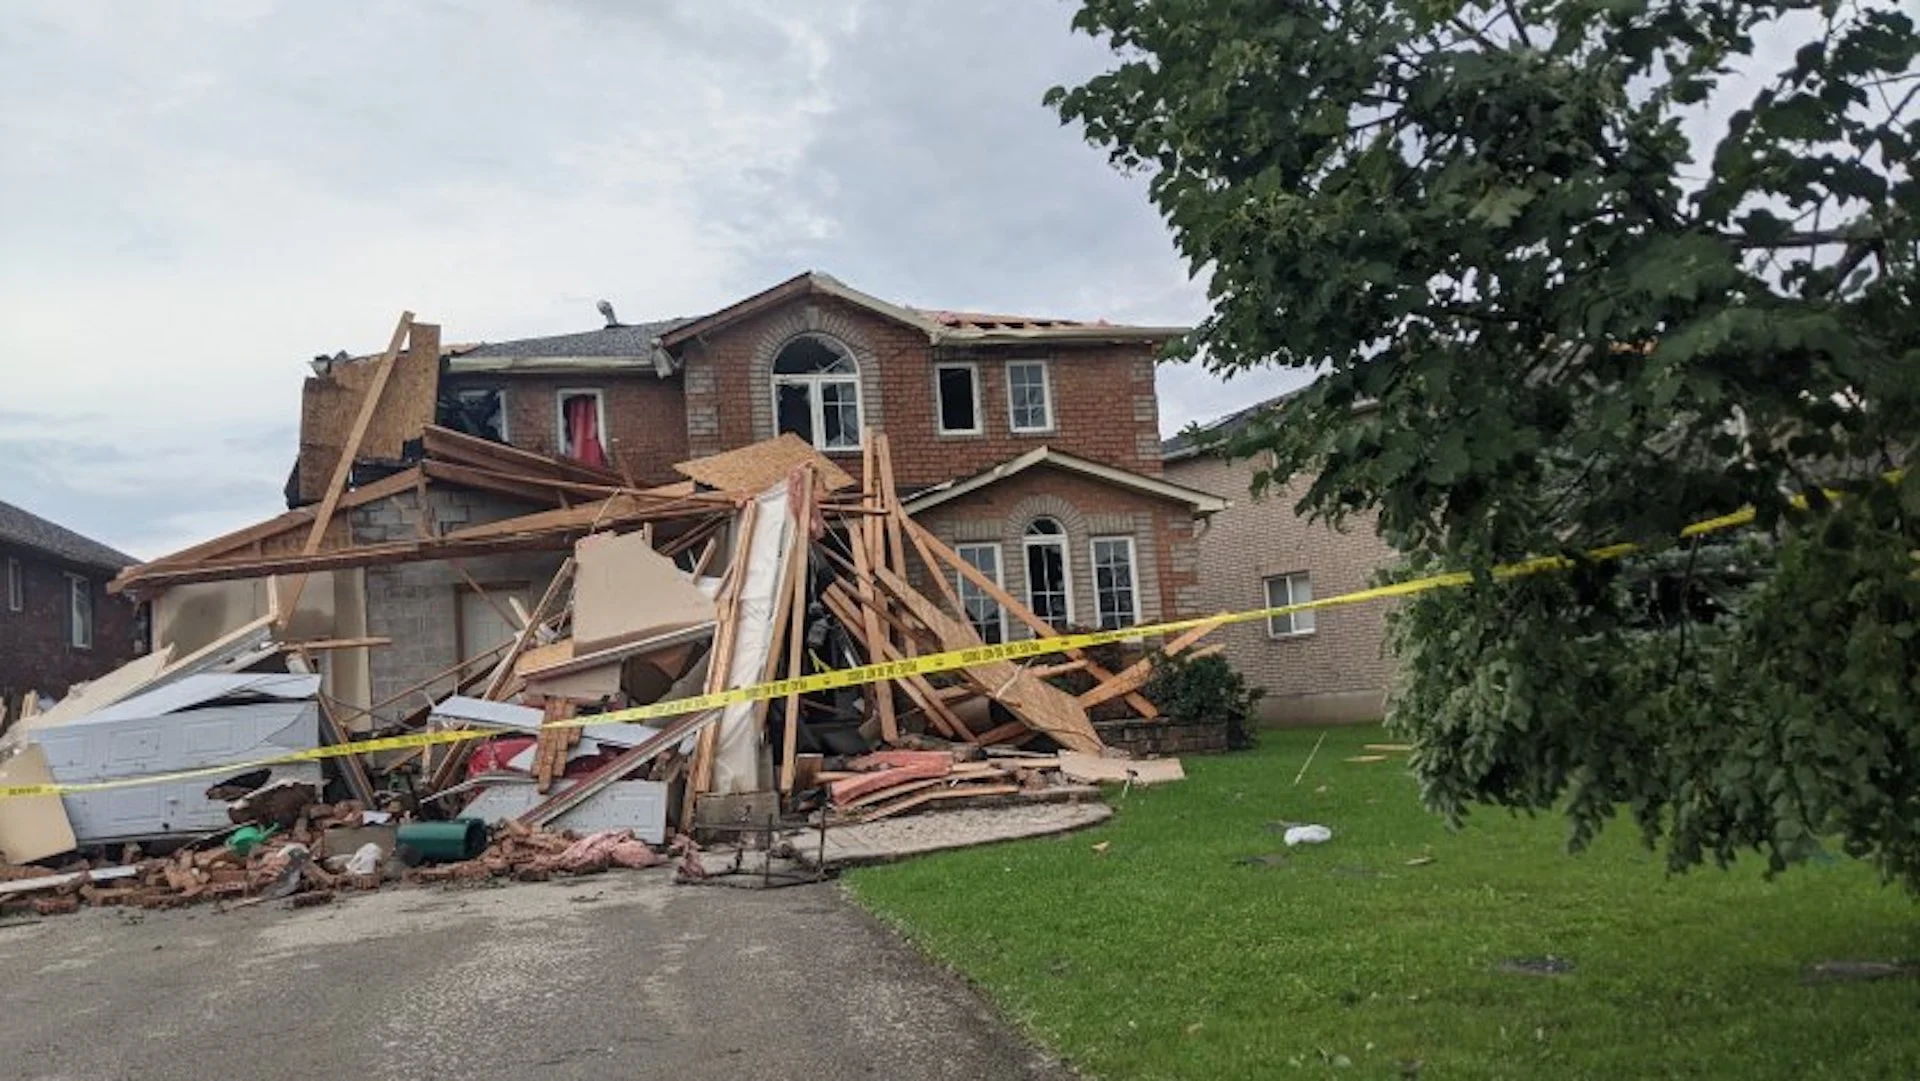 Two years have passed since damaging EF-2 tornado struck Barrie, Ont.